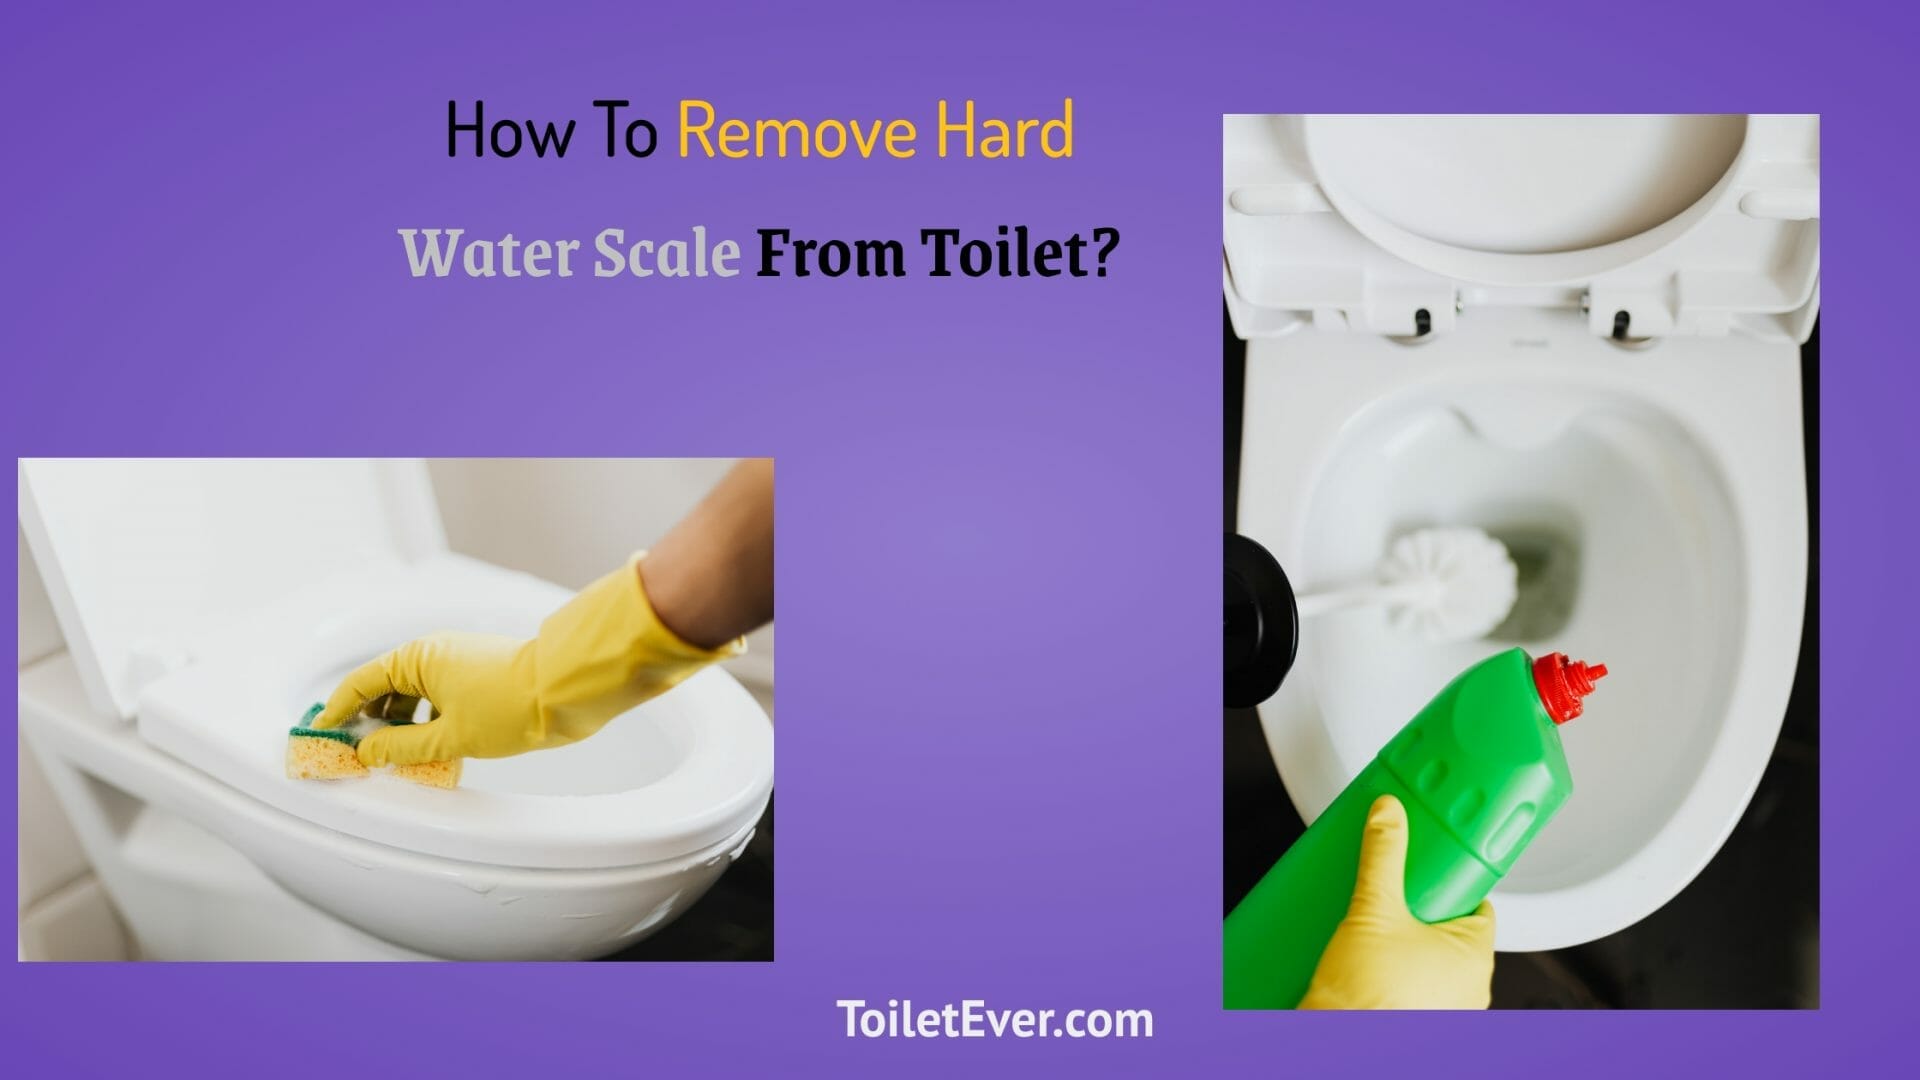 How To Remove Hard Water Scale From Toilet?